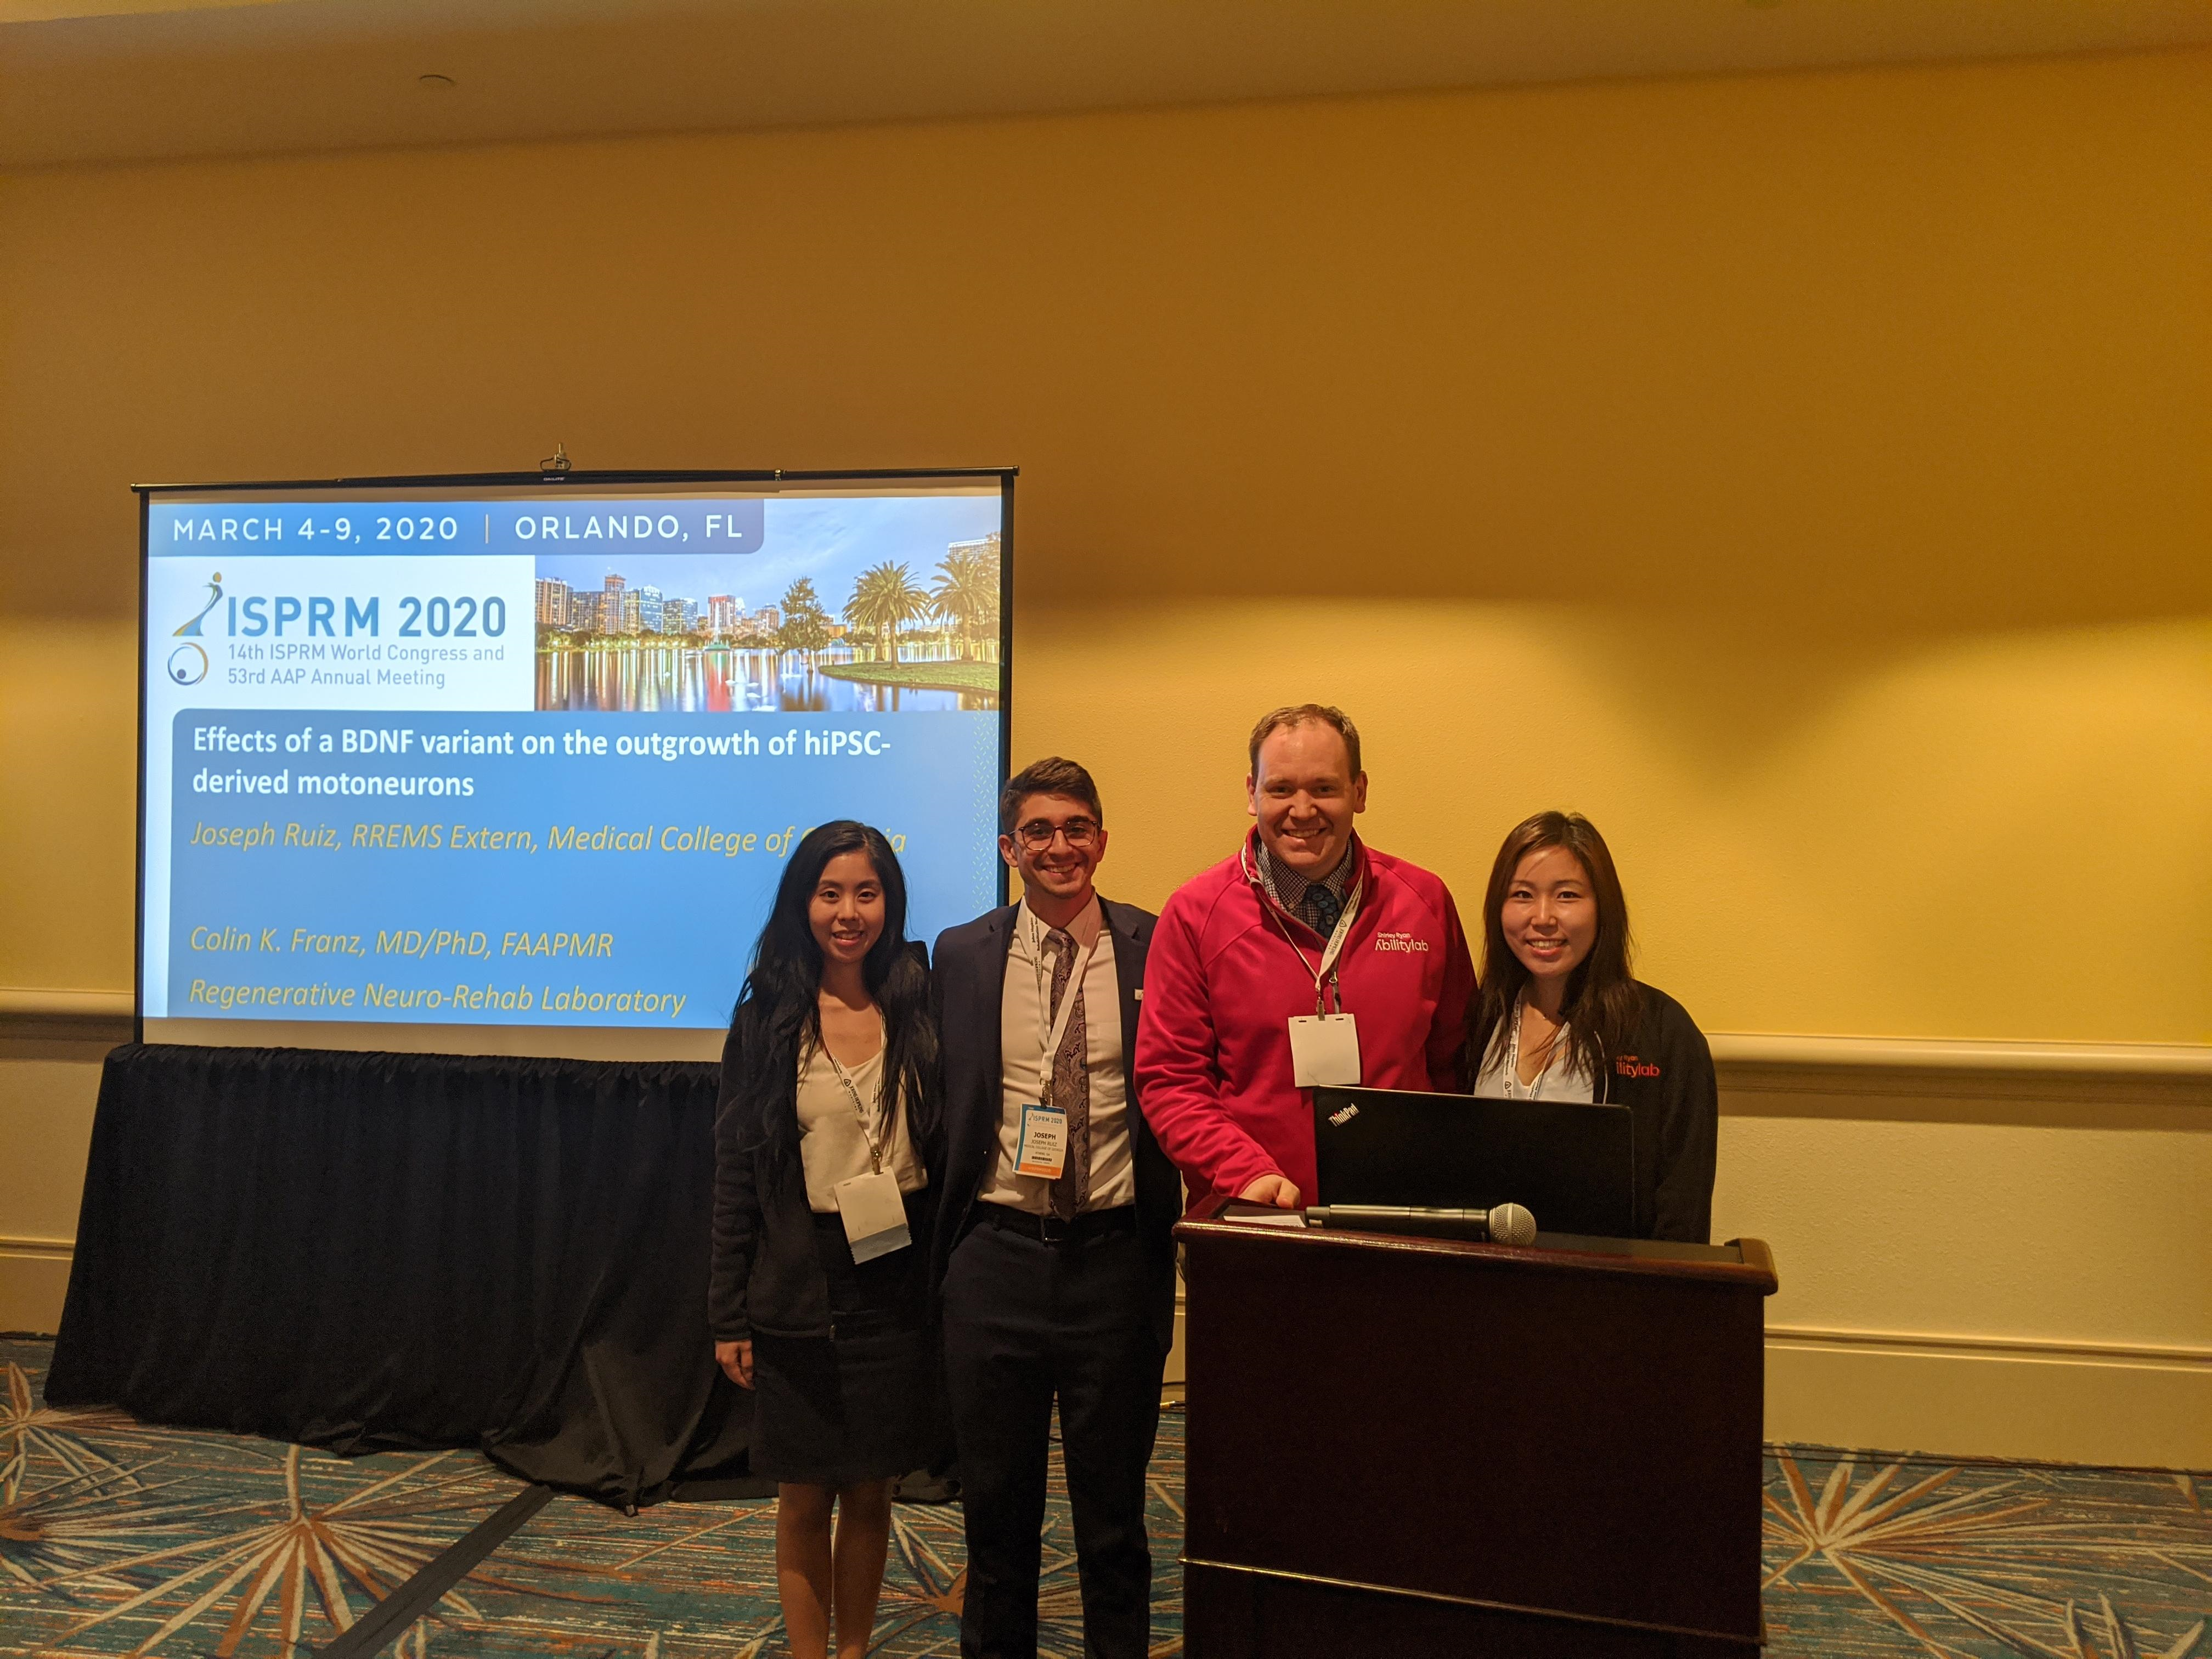 Dr Leung, Dr Ruiz, Dr Franz, and Dr Lee stand together at a conference podium